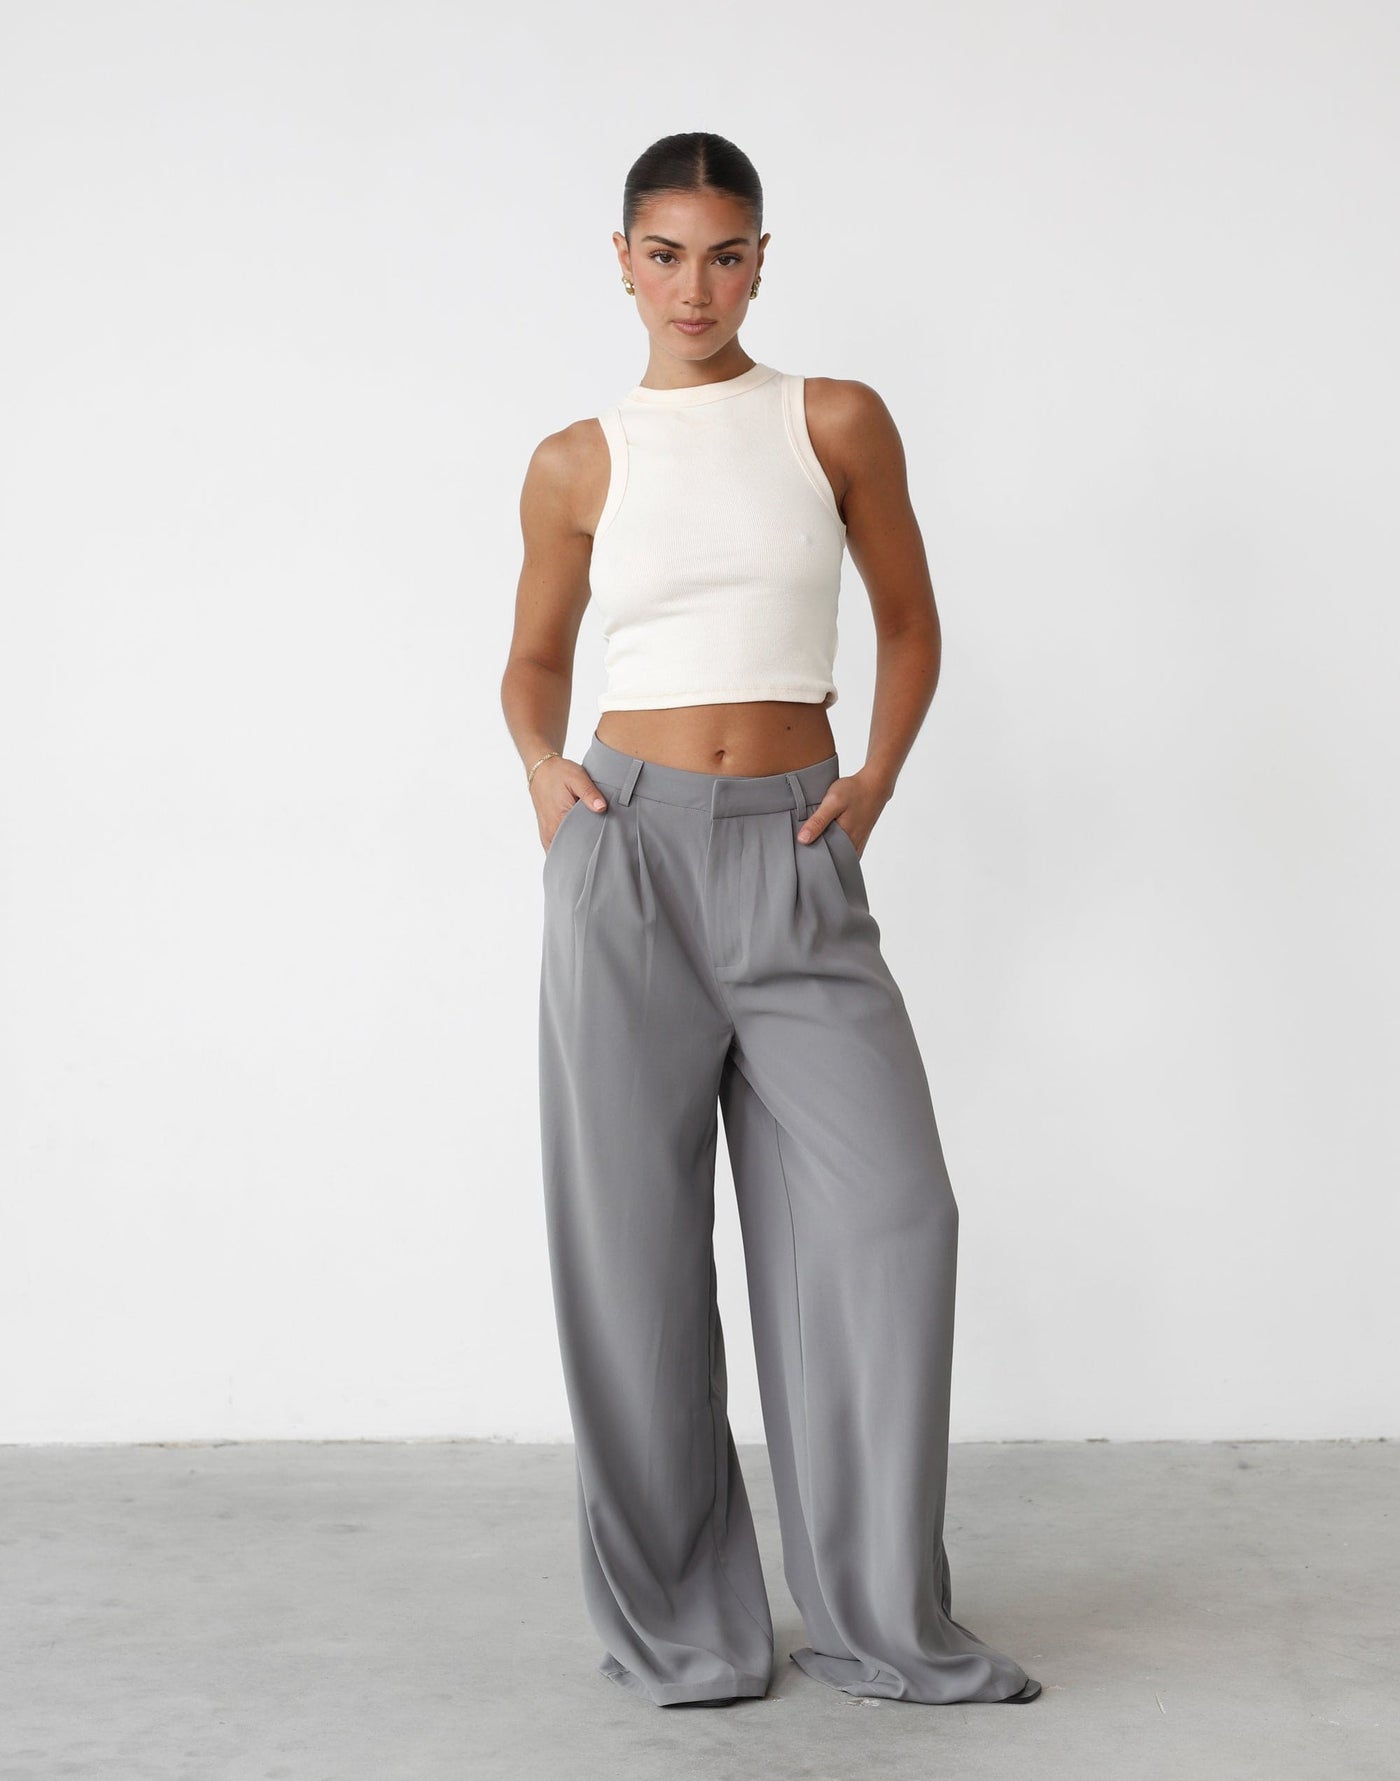 Chicago Pants (Grey) - Tailored Wide Leg Pants - Women's Pants - Charcoal Clothing